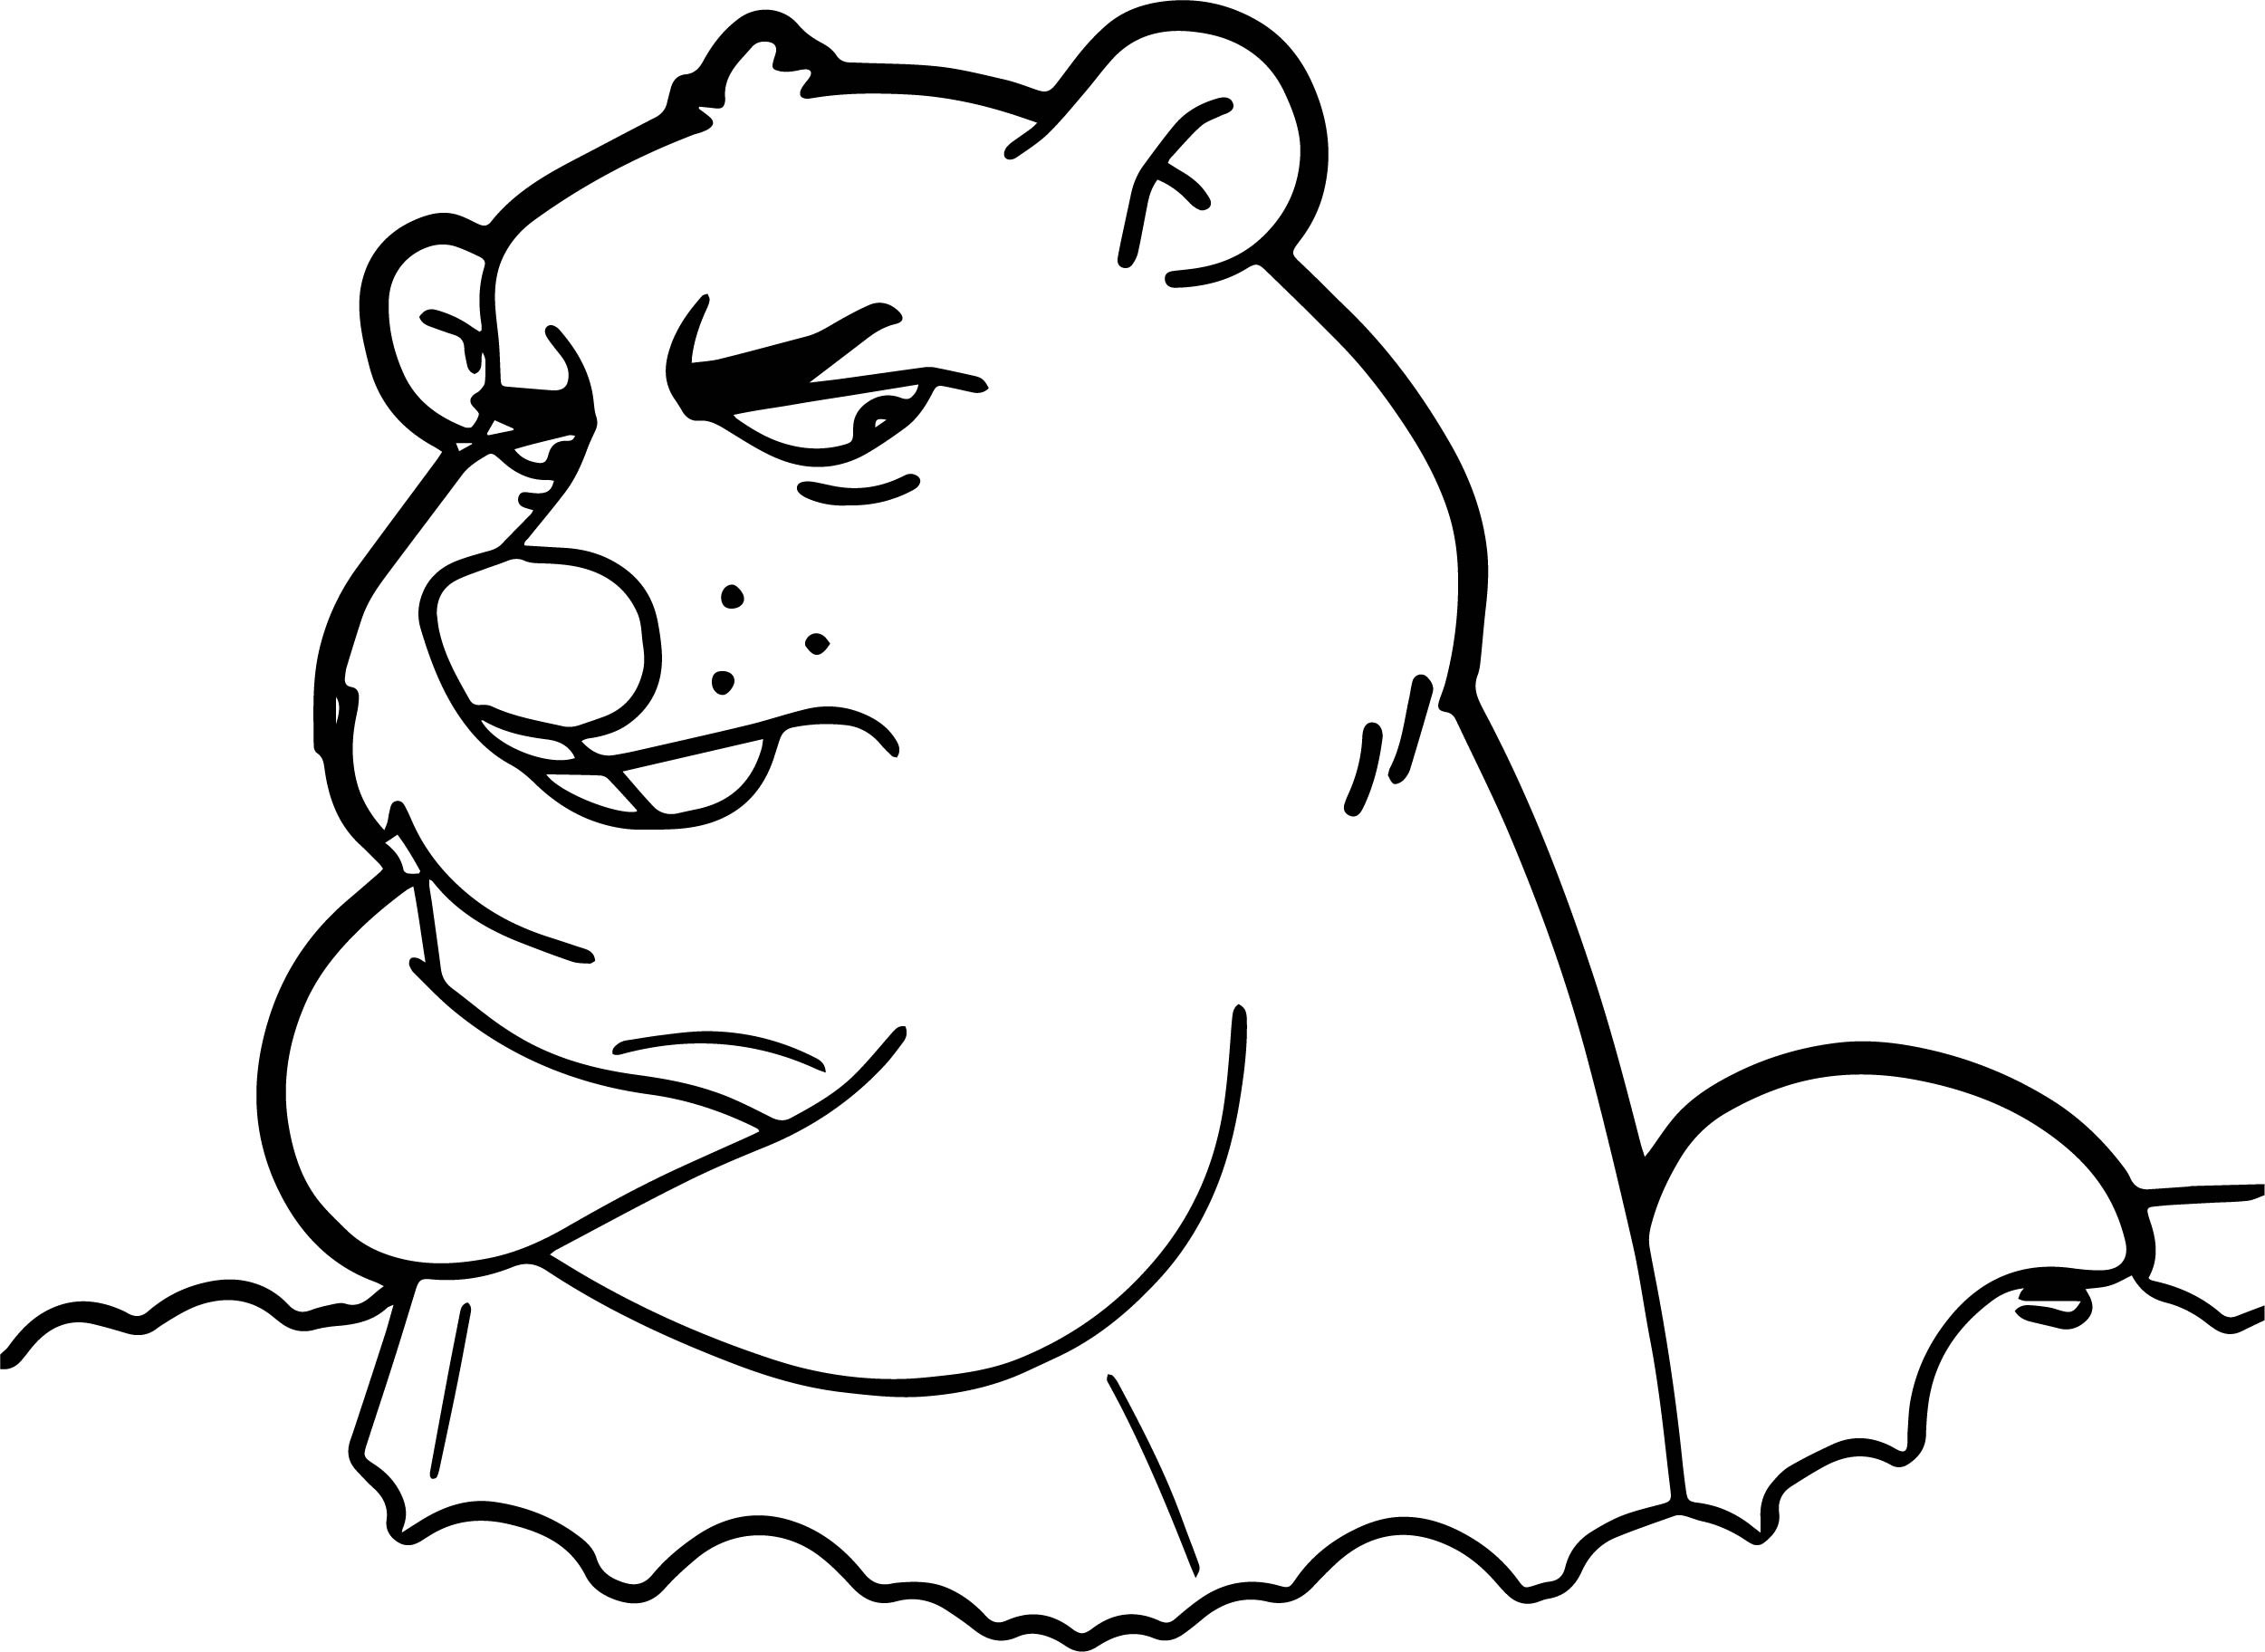 Cartoon Groundhog Day Coloring Page | Wecoloringpage